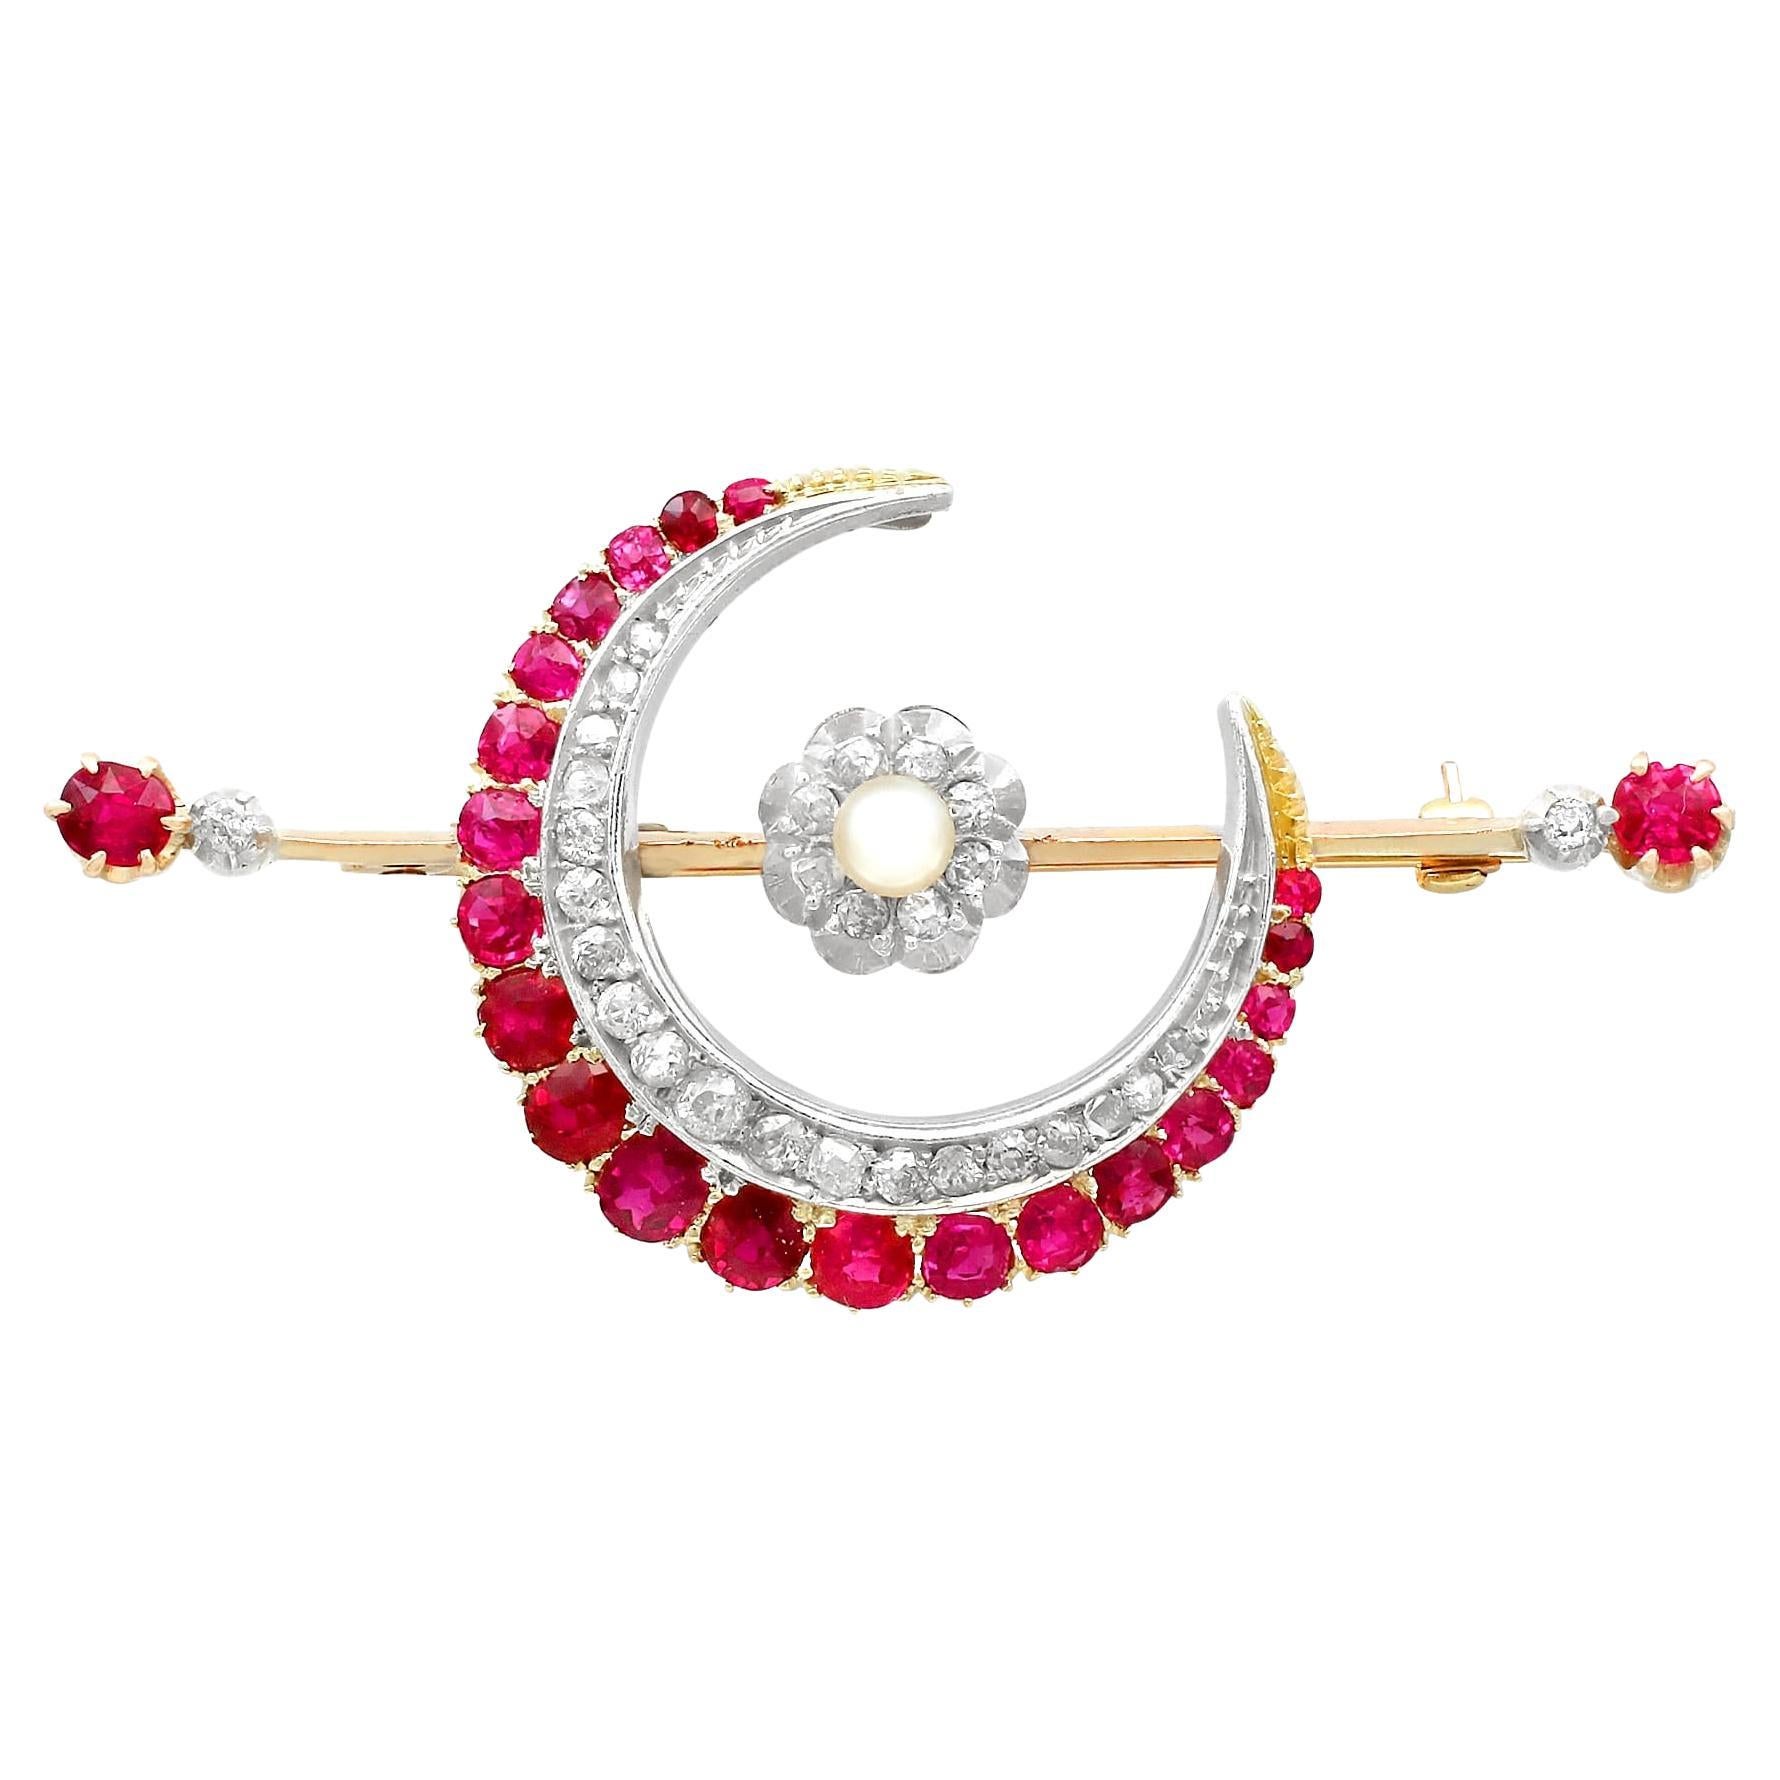 2.85 Carat Ruby Diamond Pearl Gold Crescent Brooch For Sale